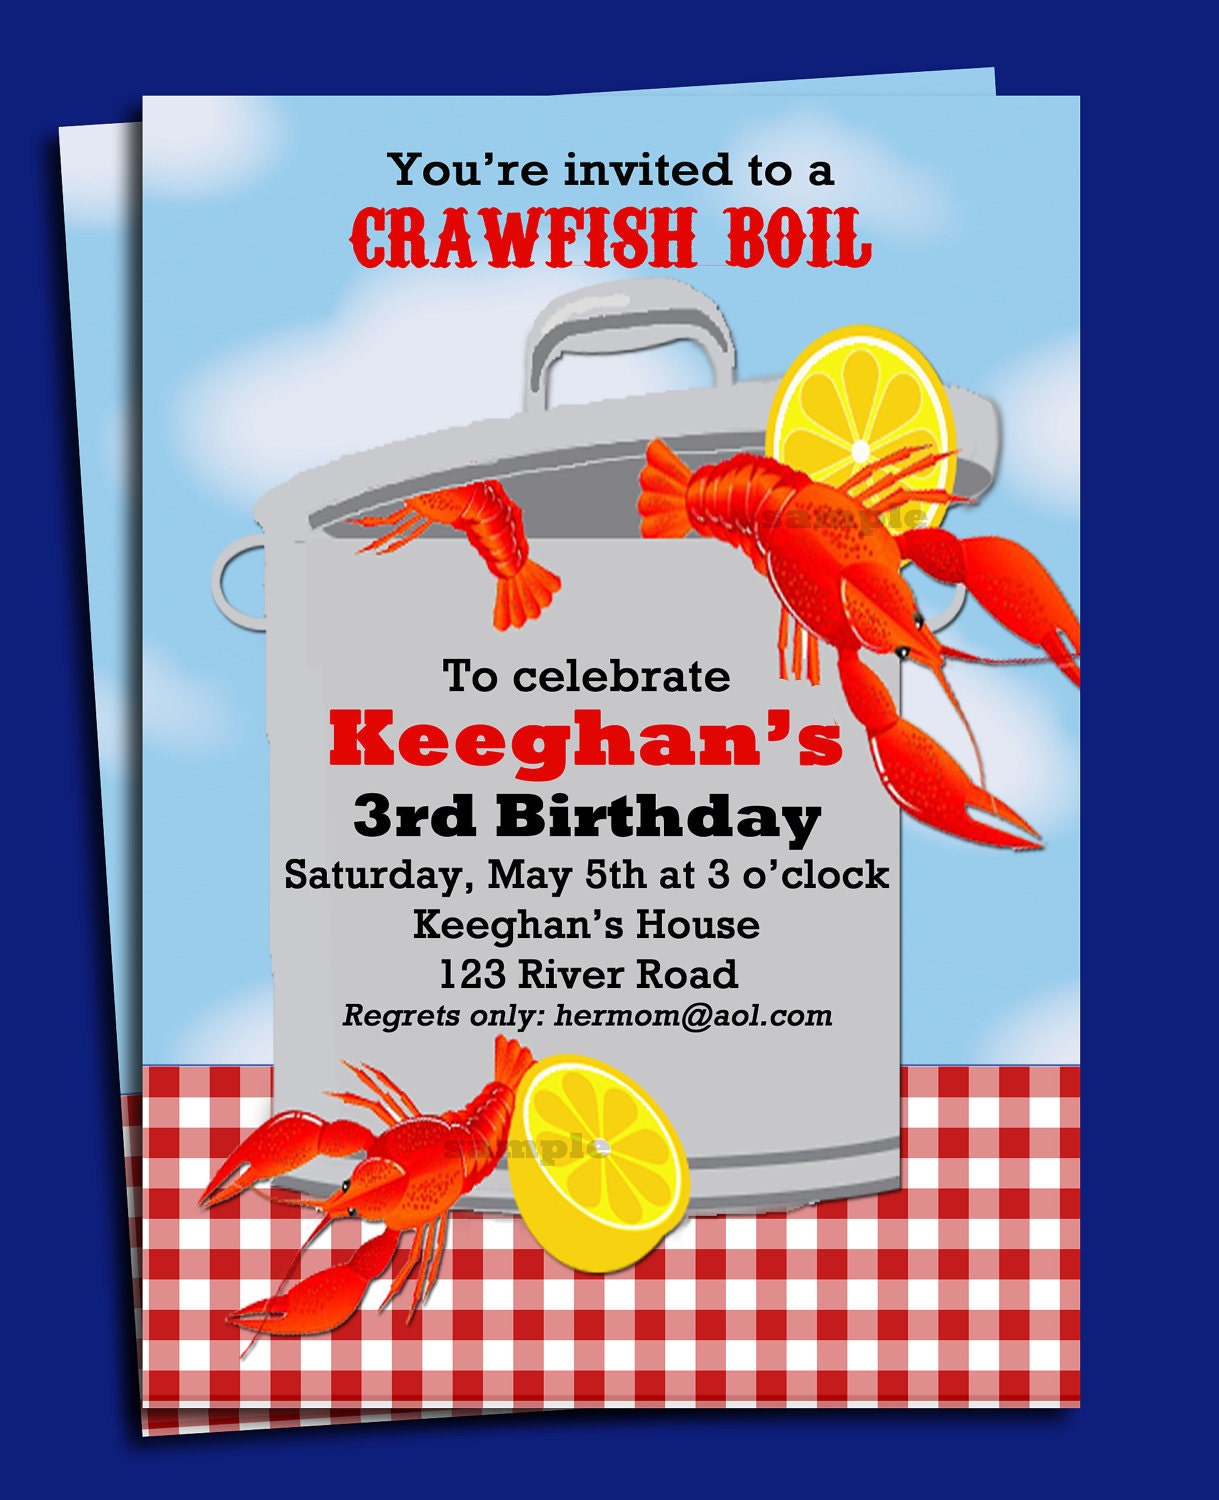 Crawfish Boil Invitation Printable or Printed with FREE SHIPPING